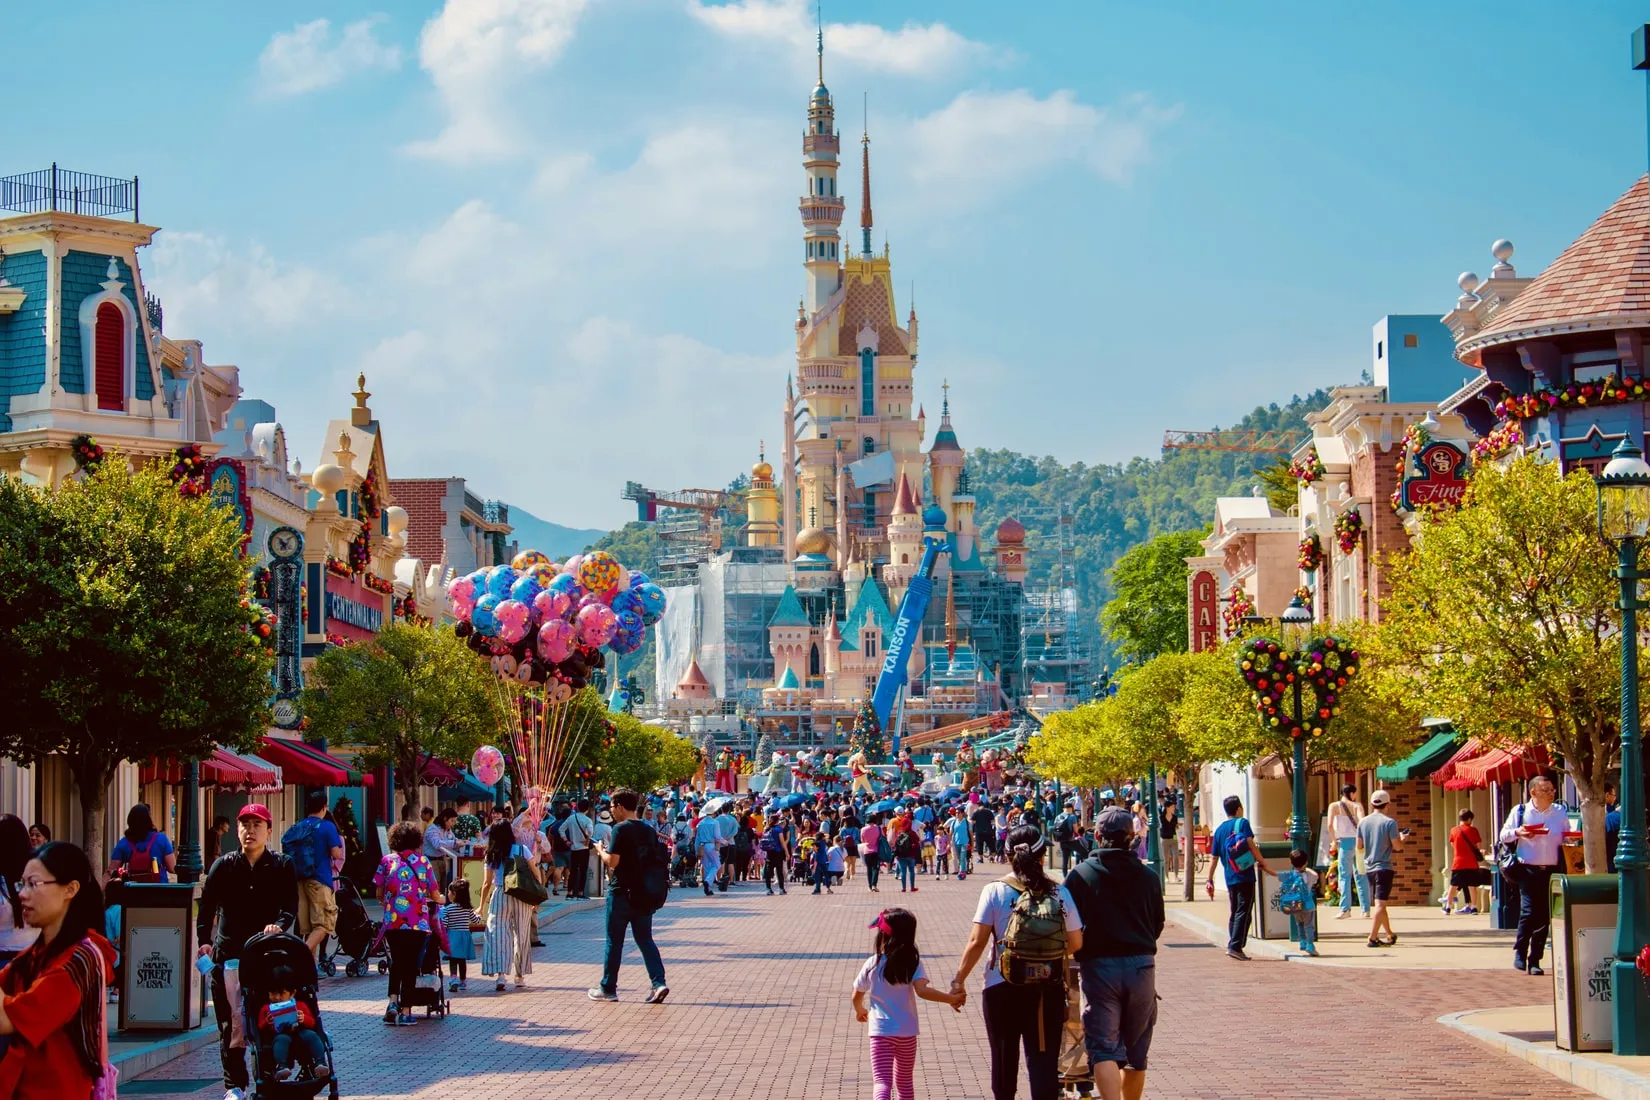 Familly attractions example - Parents and children have fun at Disneyland